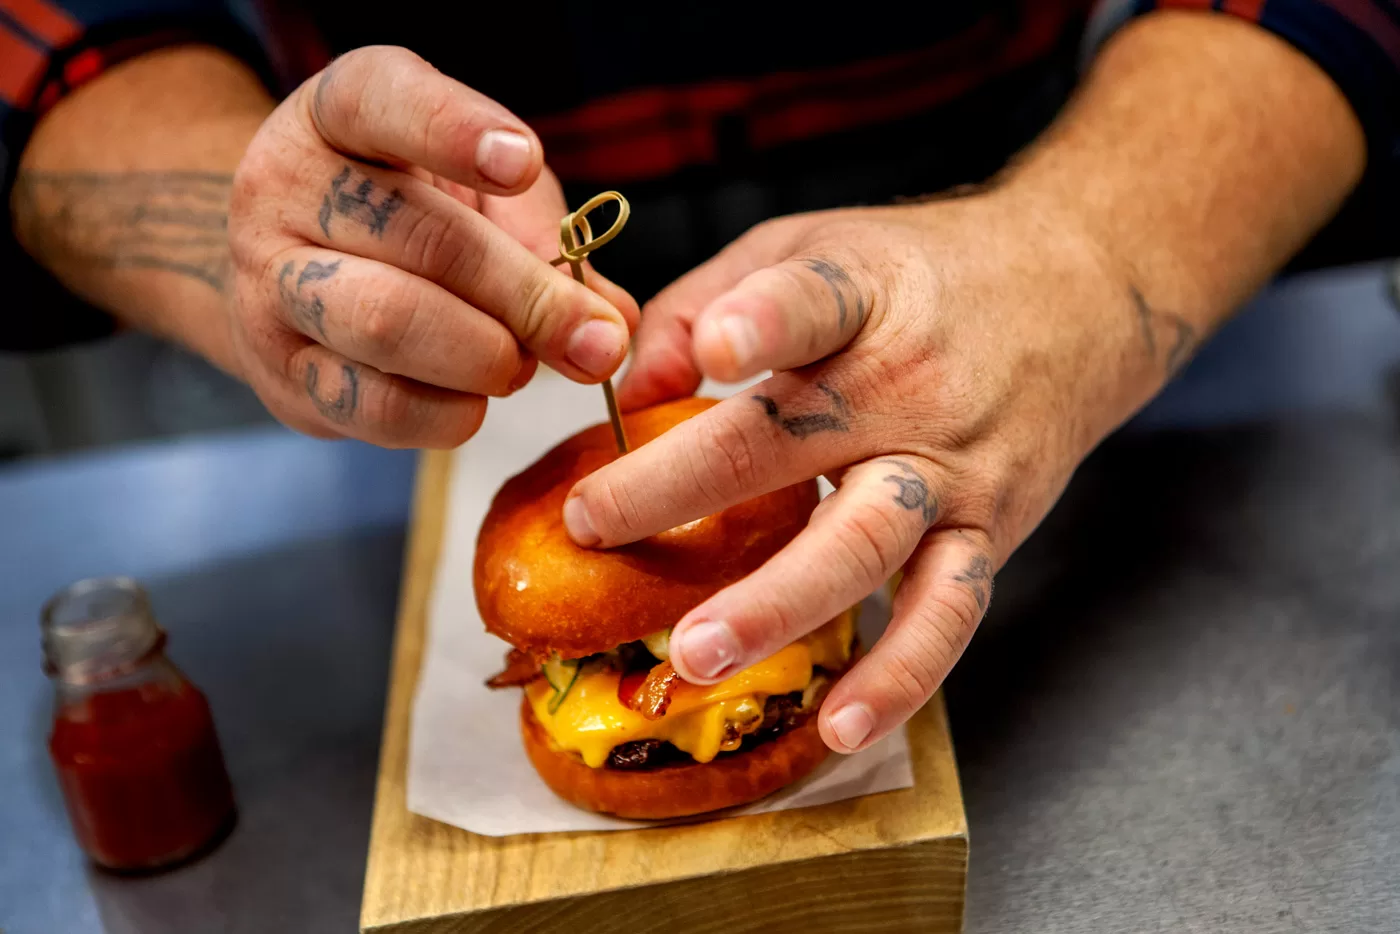 Restaurant Chef with Knuckle tattoos preparing a cheeseburger on a wooden tray slab with a side of mini ketchup